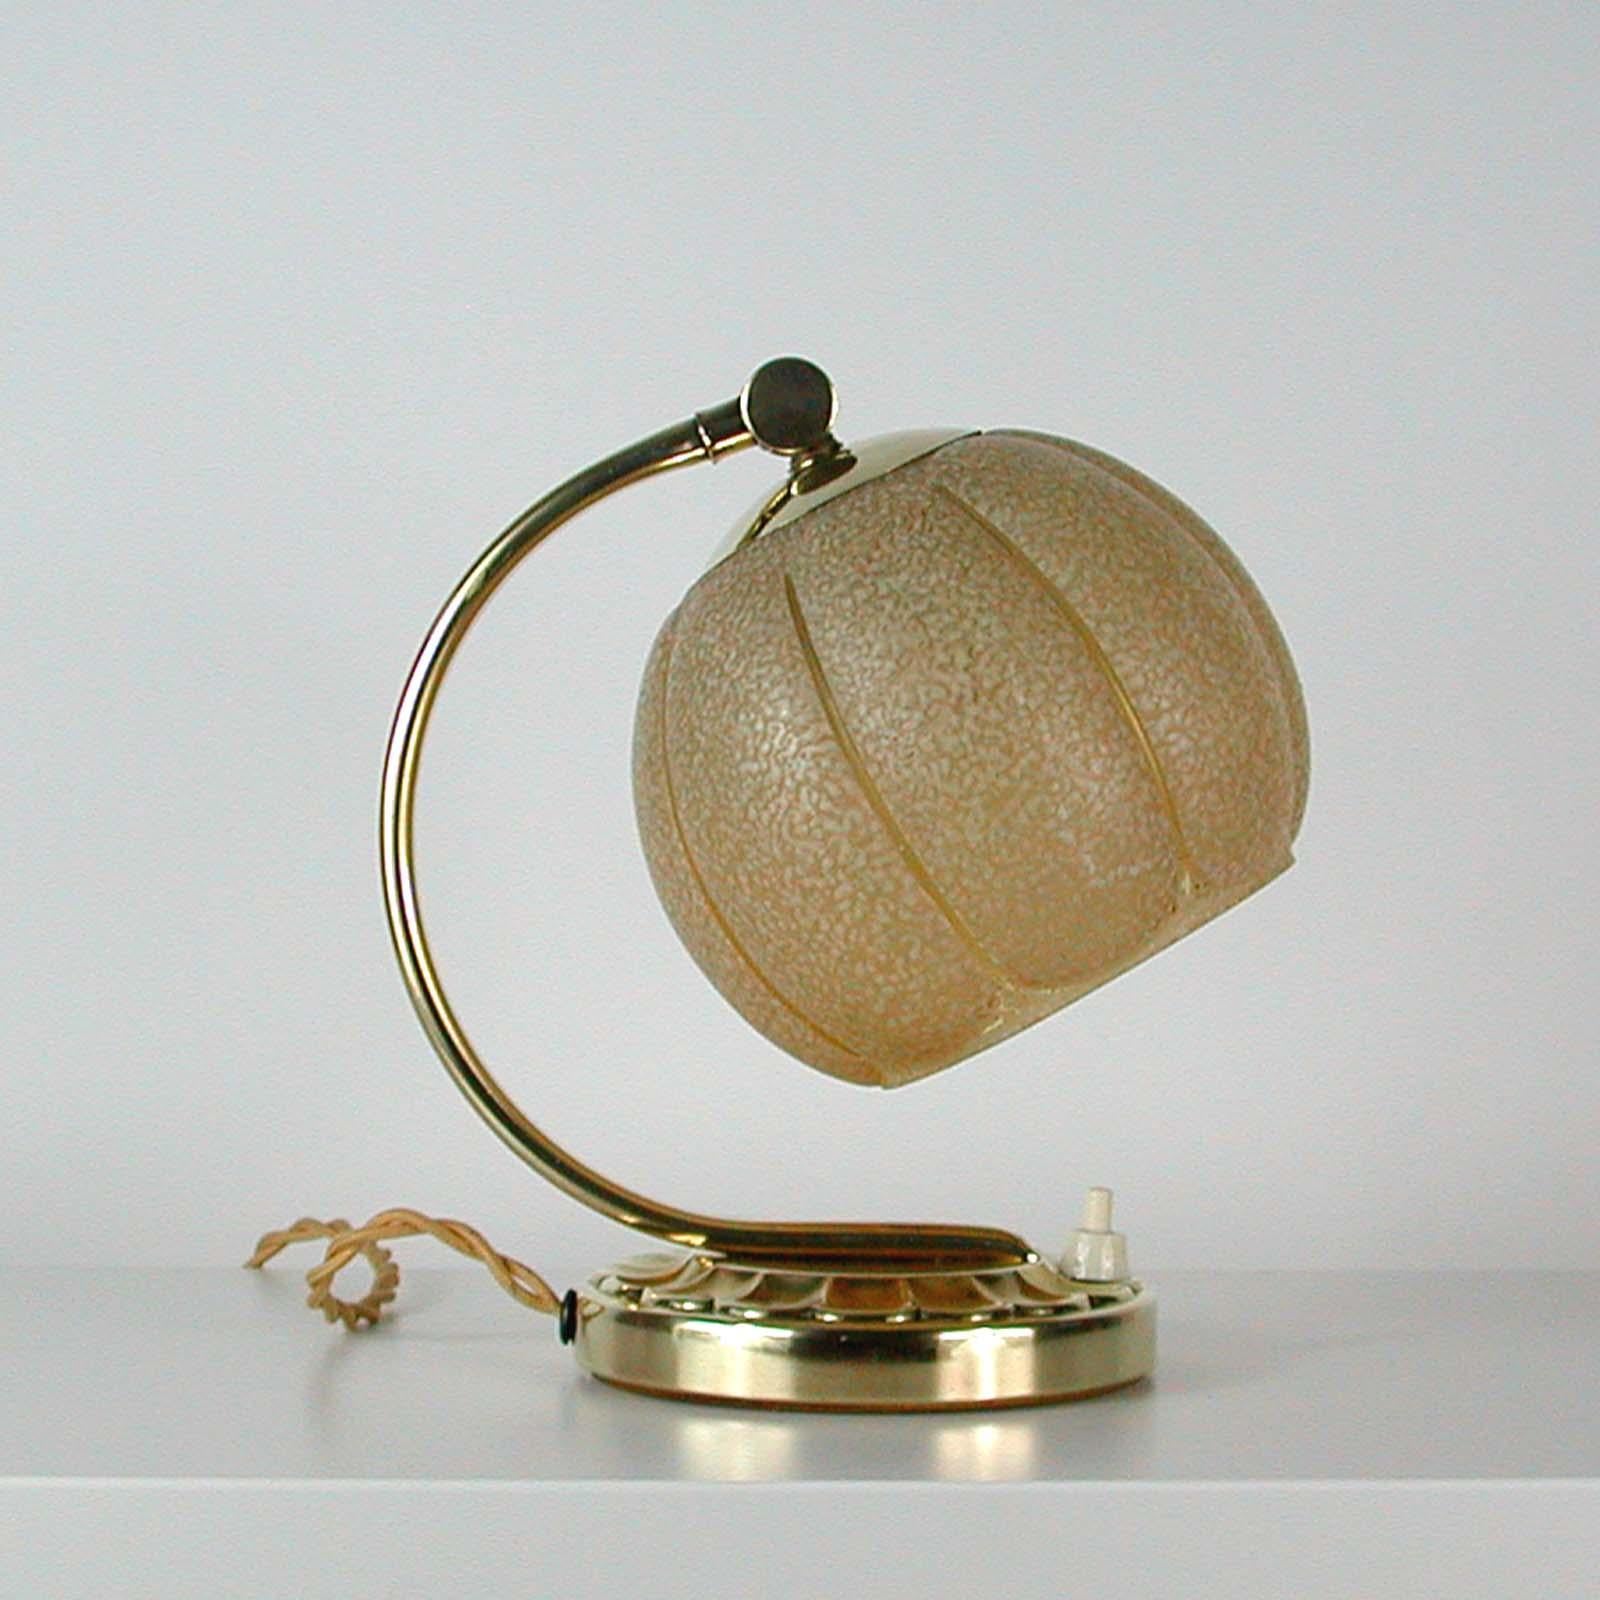 Mid-20th Century German Bauhaus Art Deco Brass and Textured Glass Table Lamp, 1930s DRGM